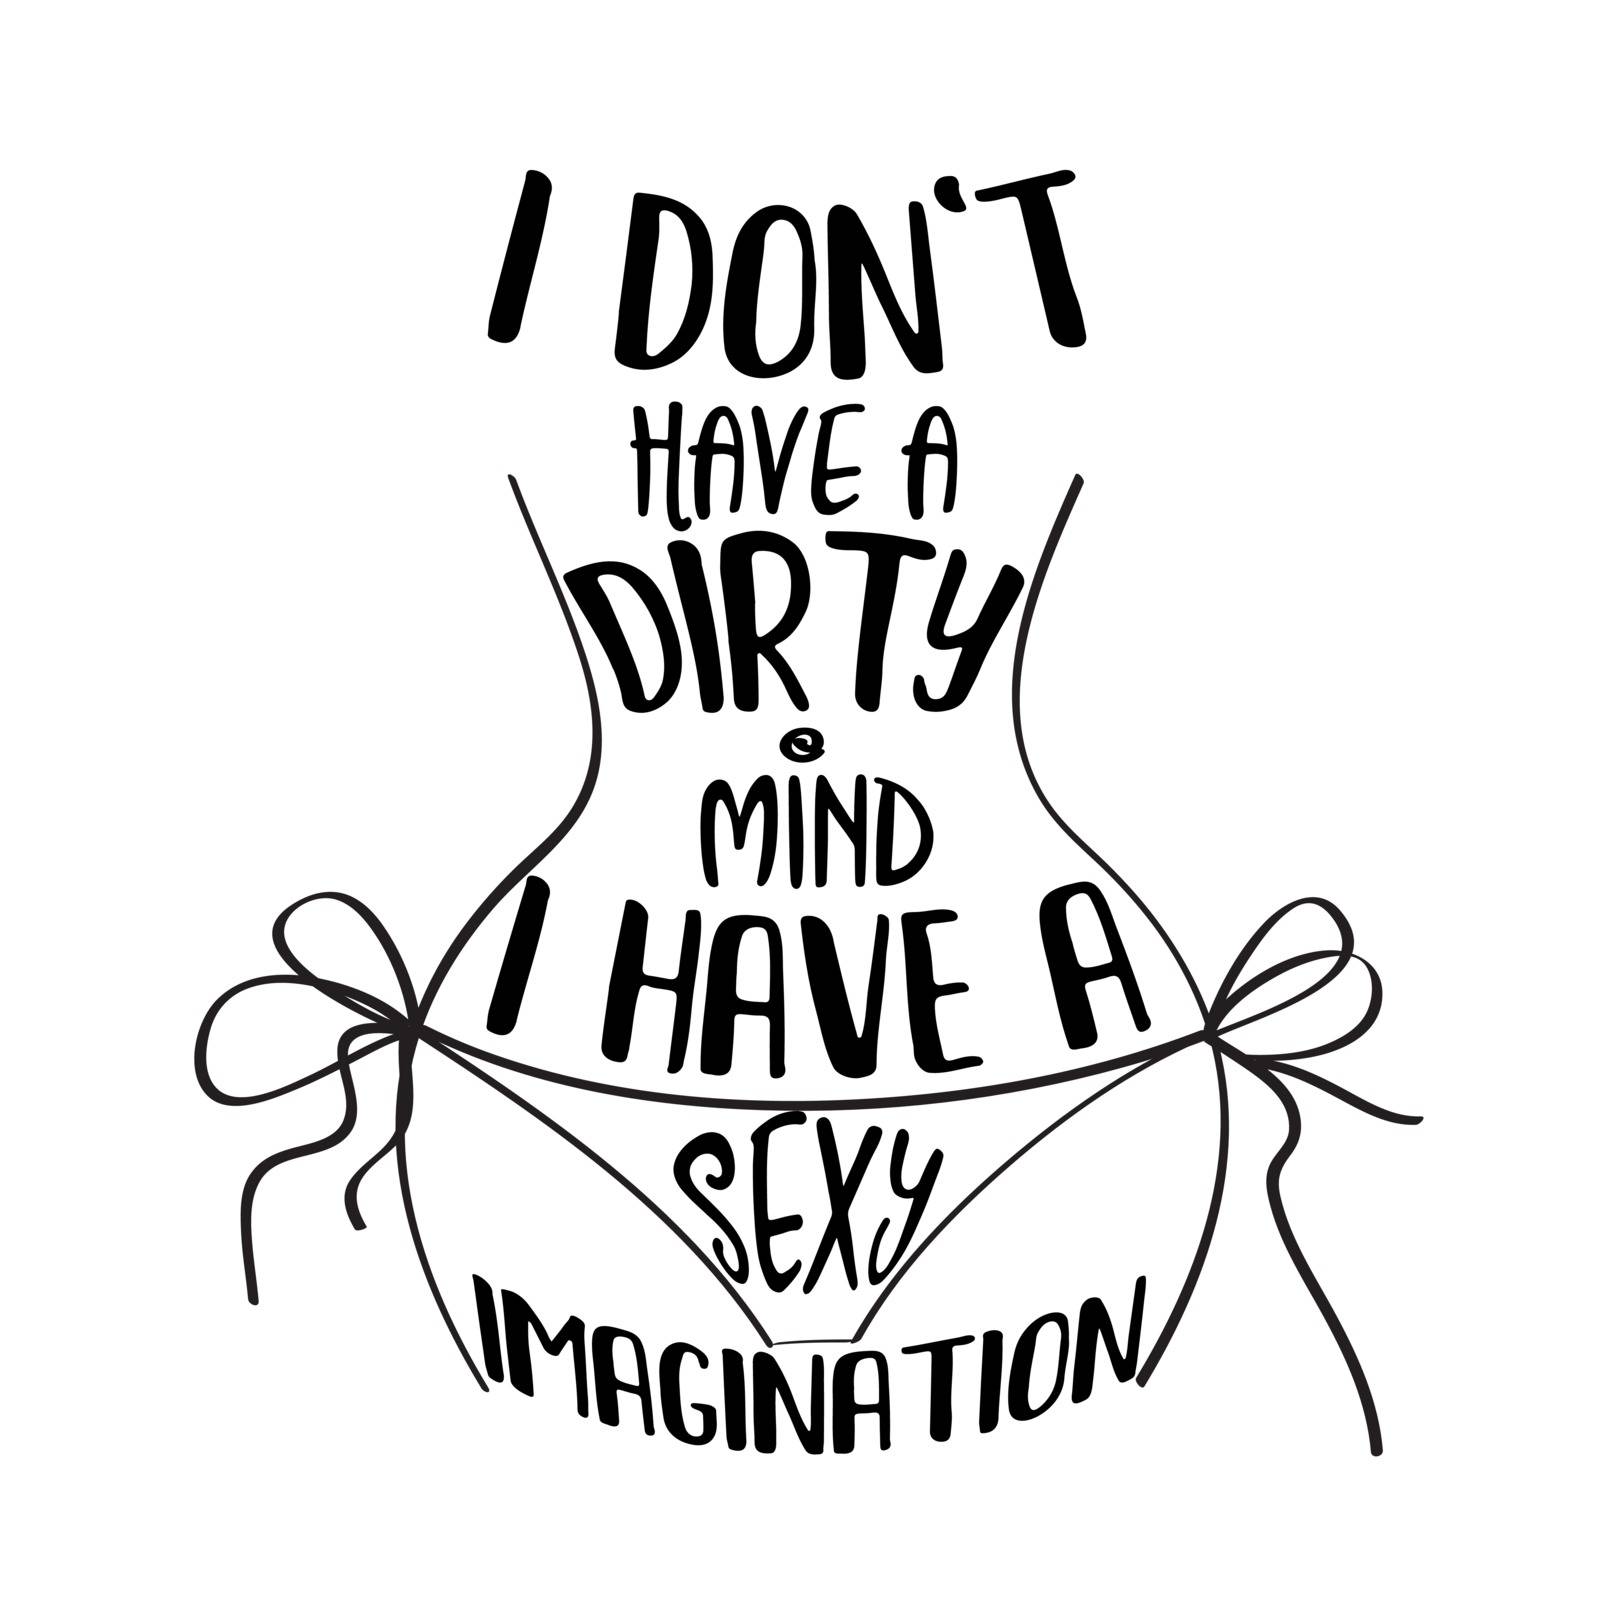 Funny  hand drawn quote about dirty mind by balasoiu